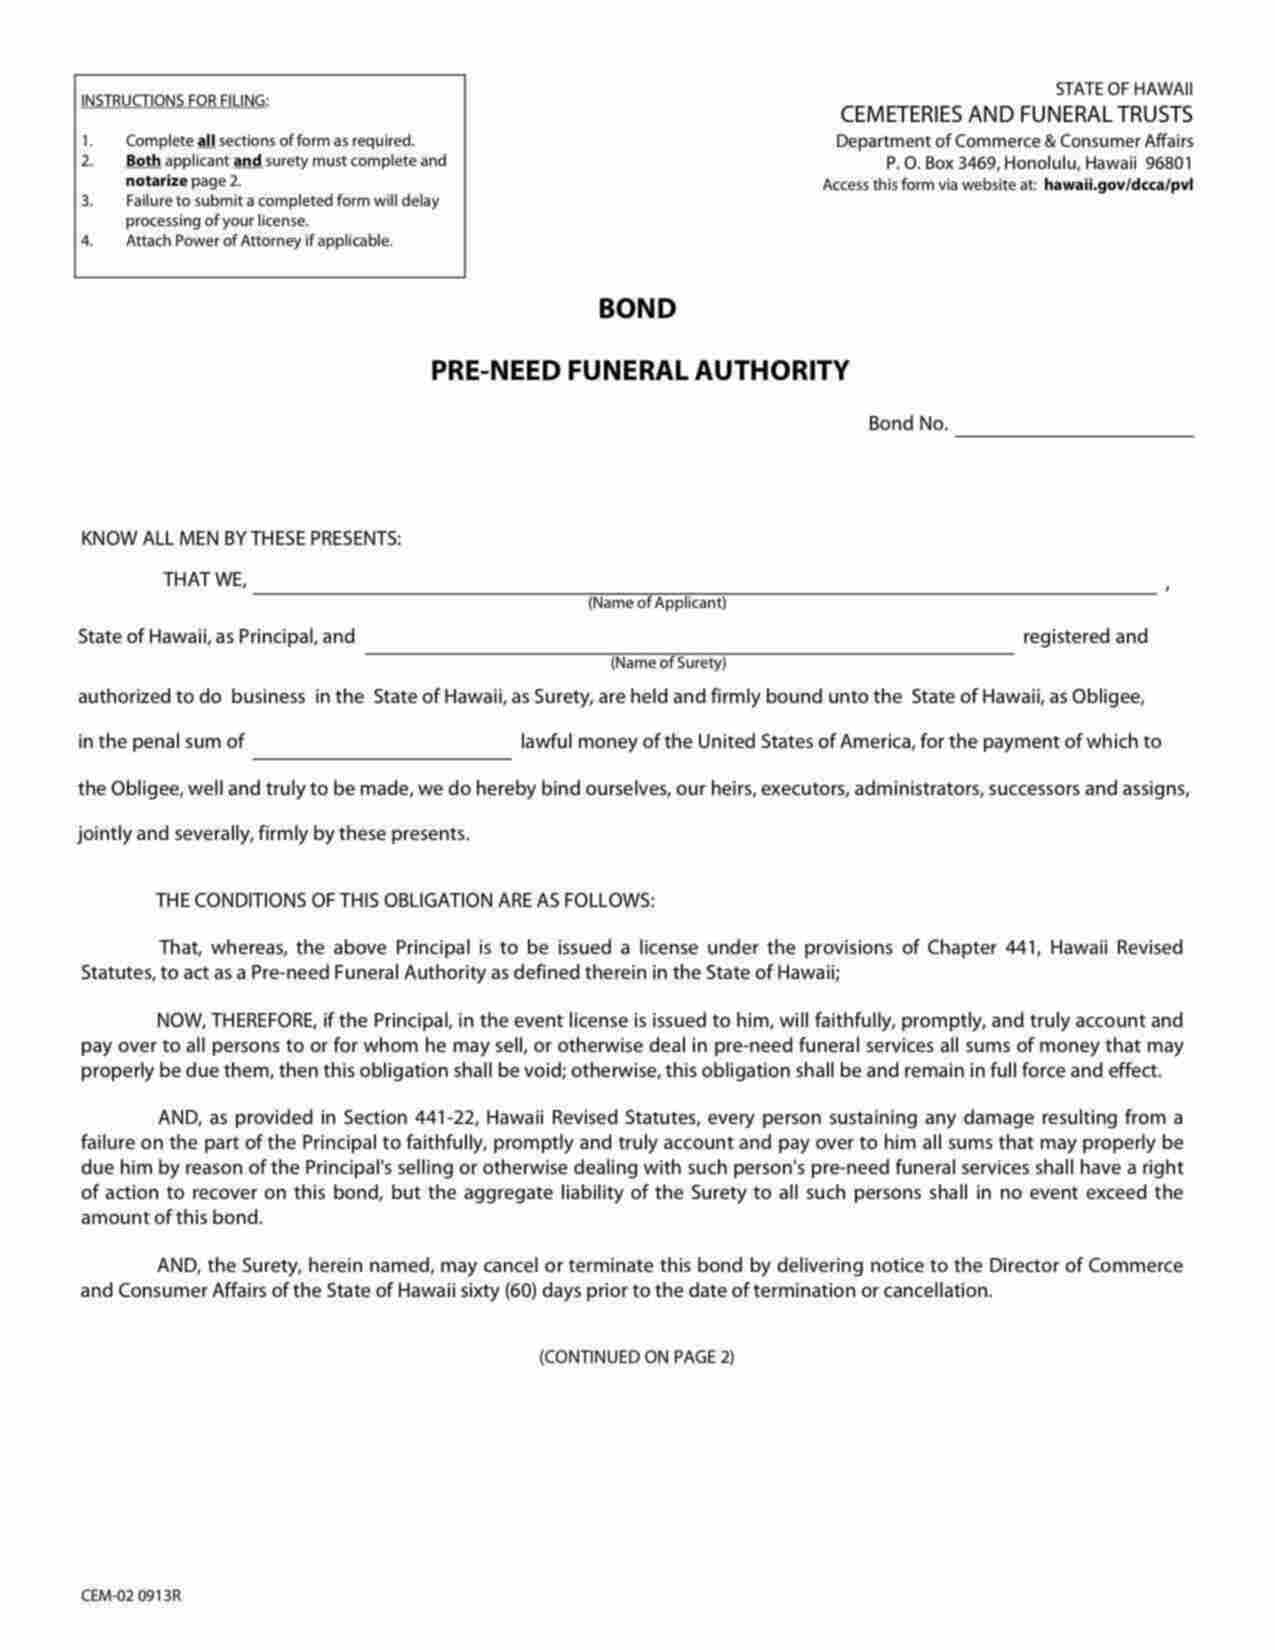 Hawaii Pre-Need Funeral Authority Bond Form